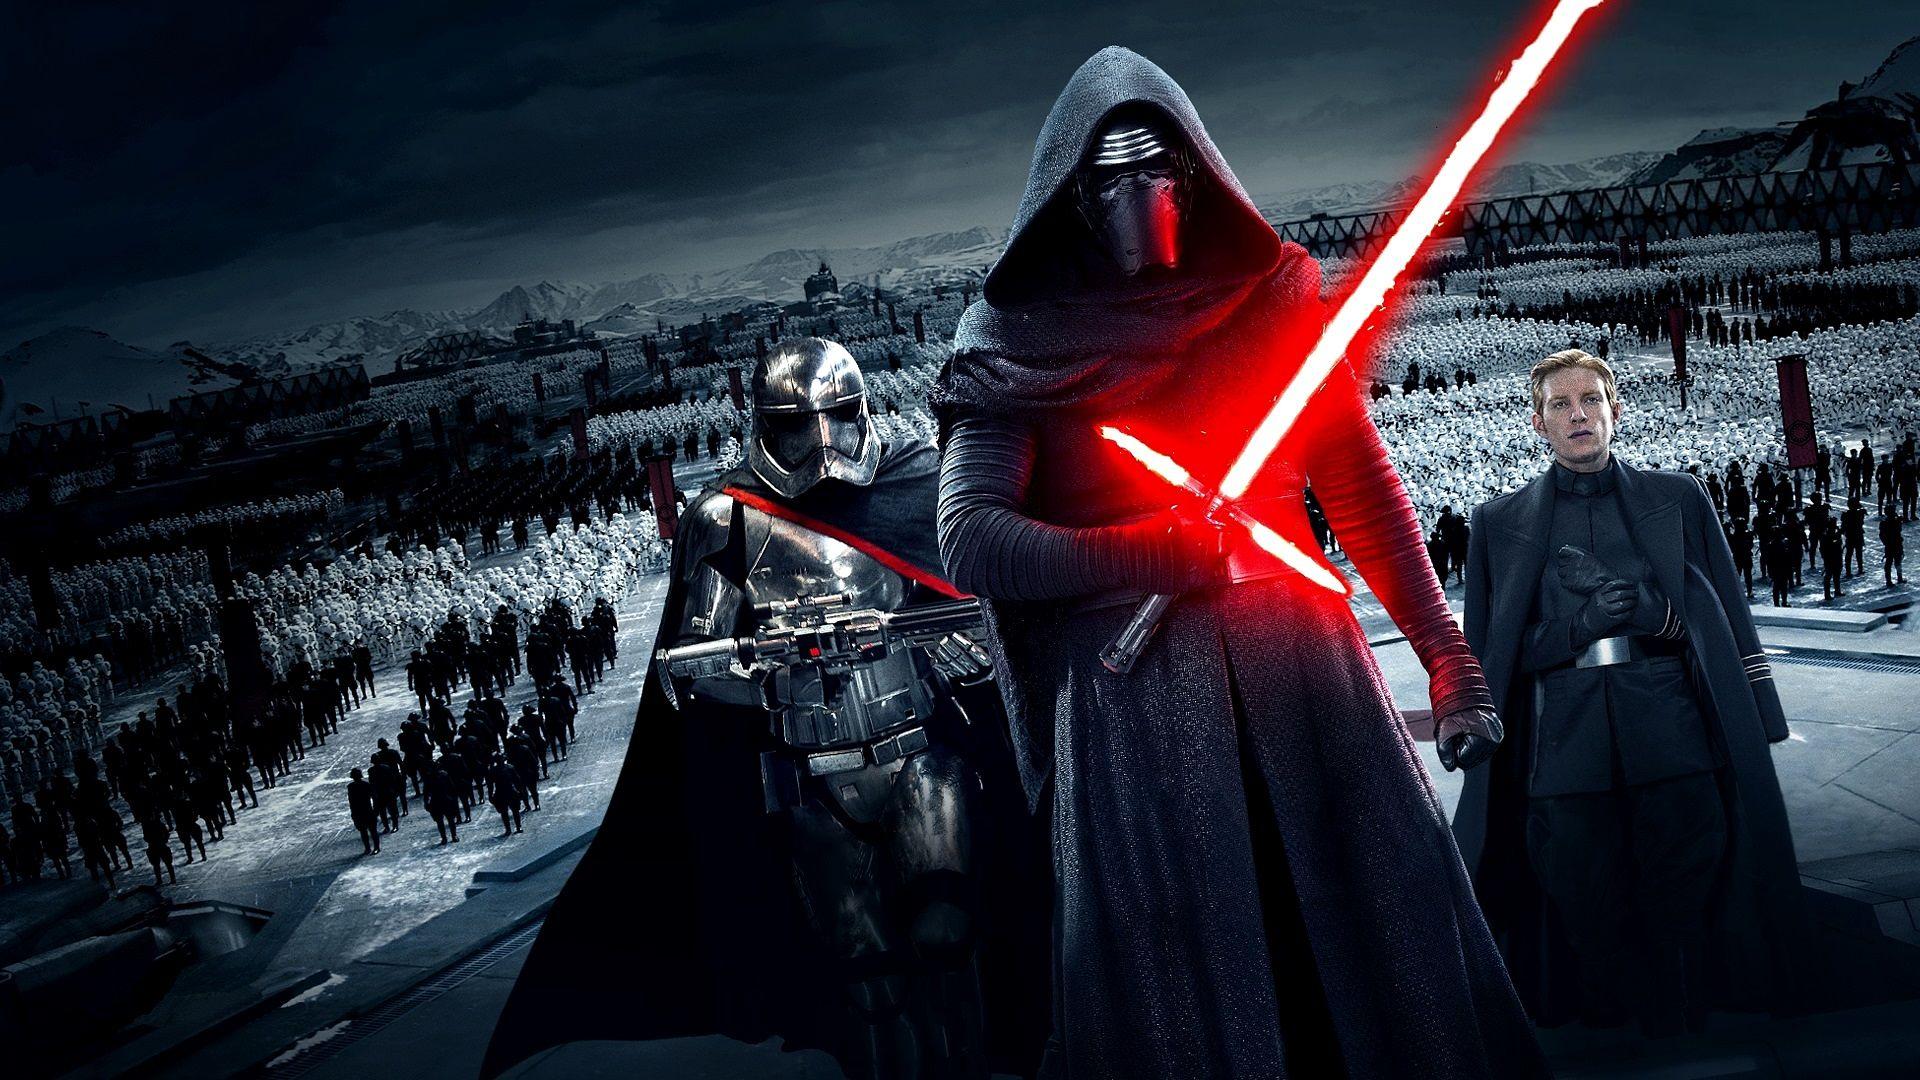 The Force Awakens' villains and the shadow of the Empire. Den of Geek